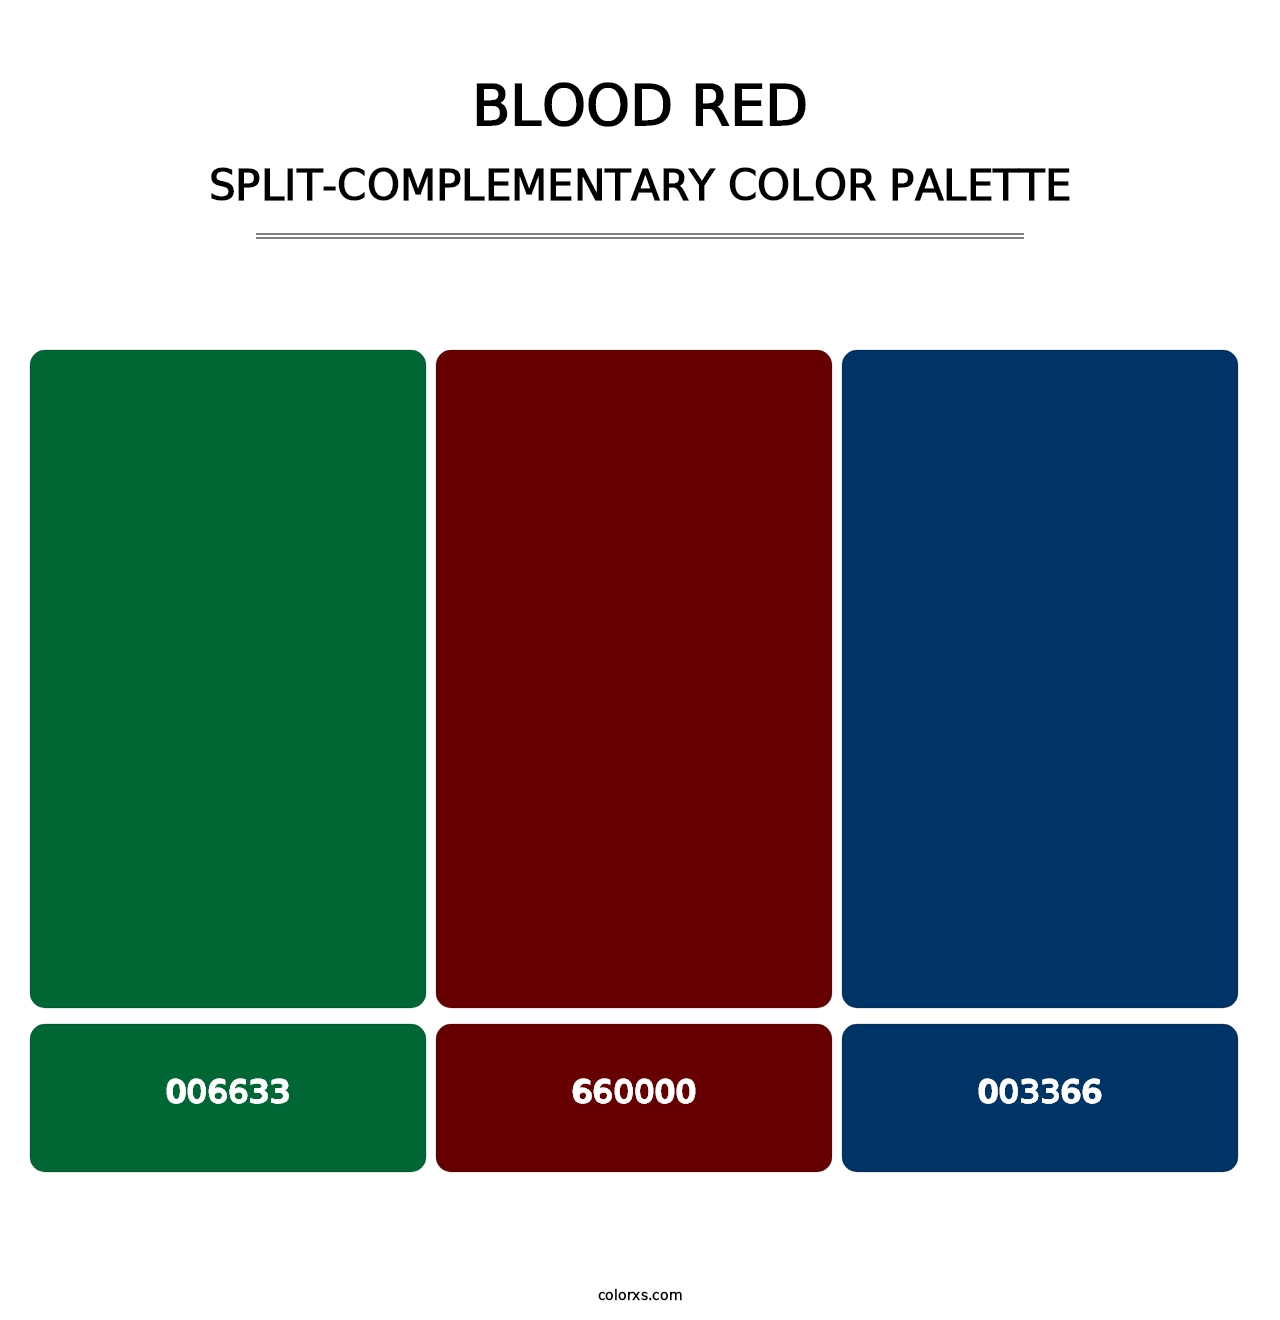 Blood Red - Split-Complementary Color Palette